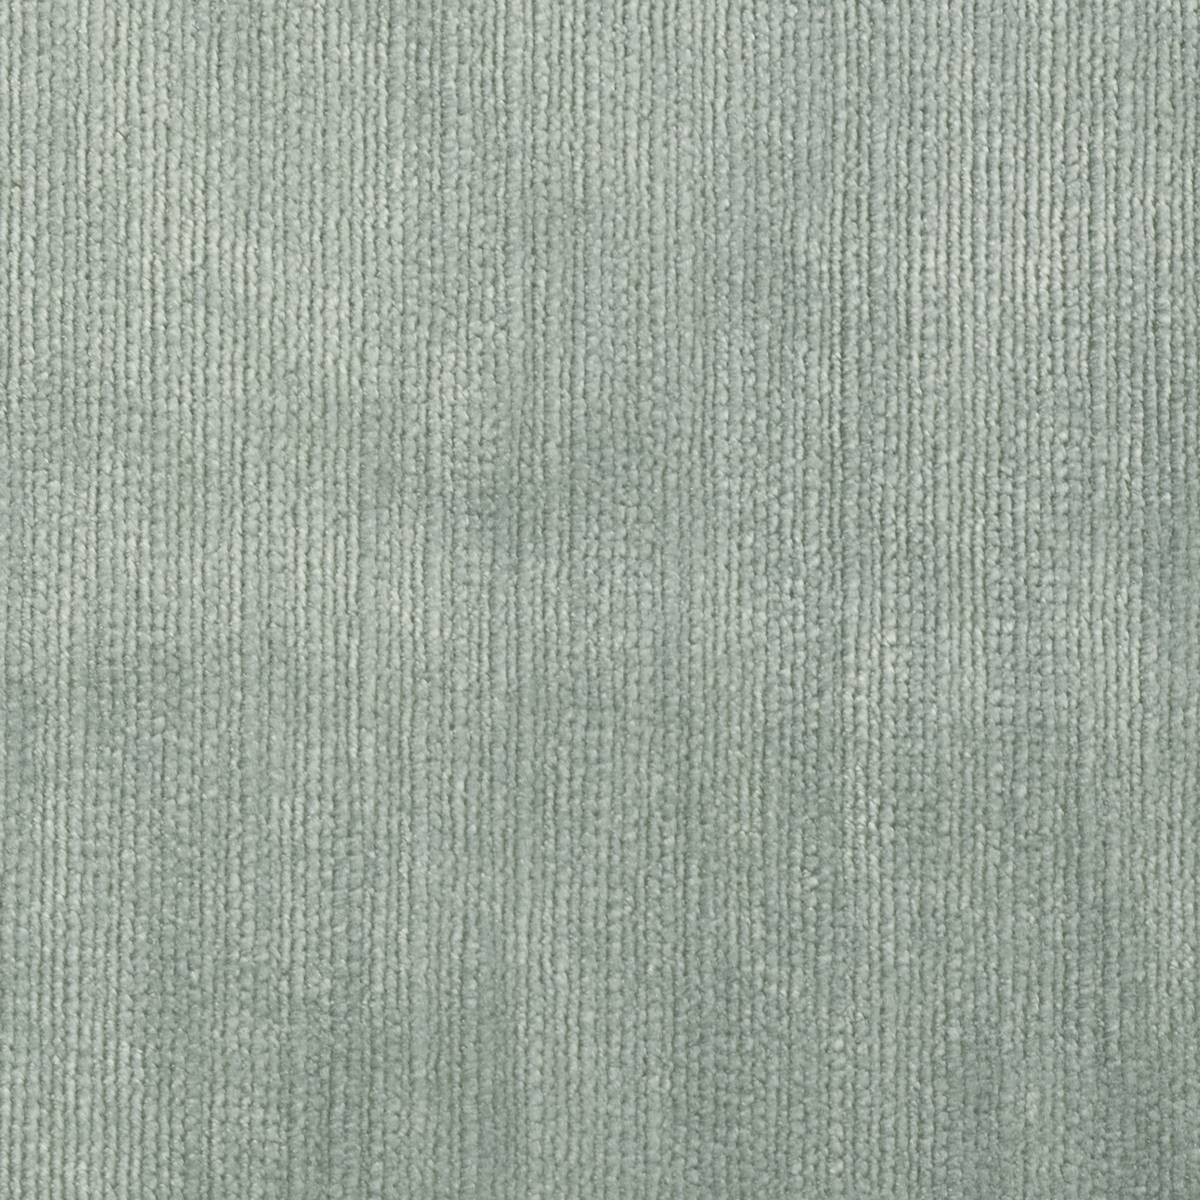 Momentum Velvets Seaglass Fabric by Harlequin